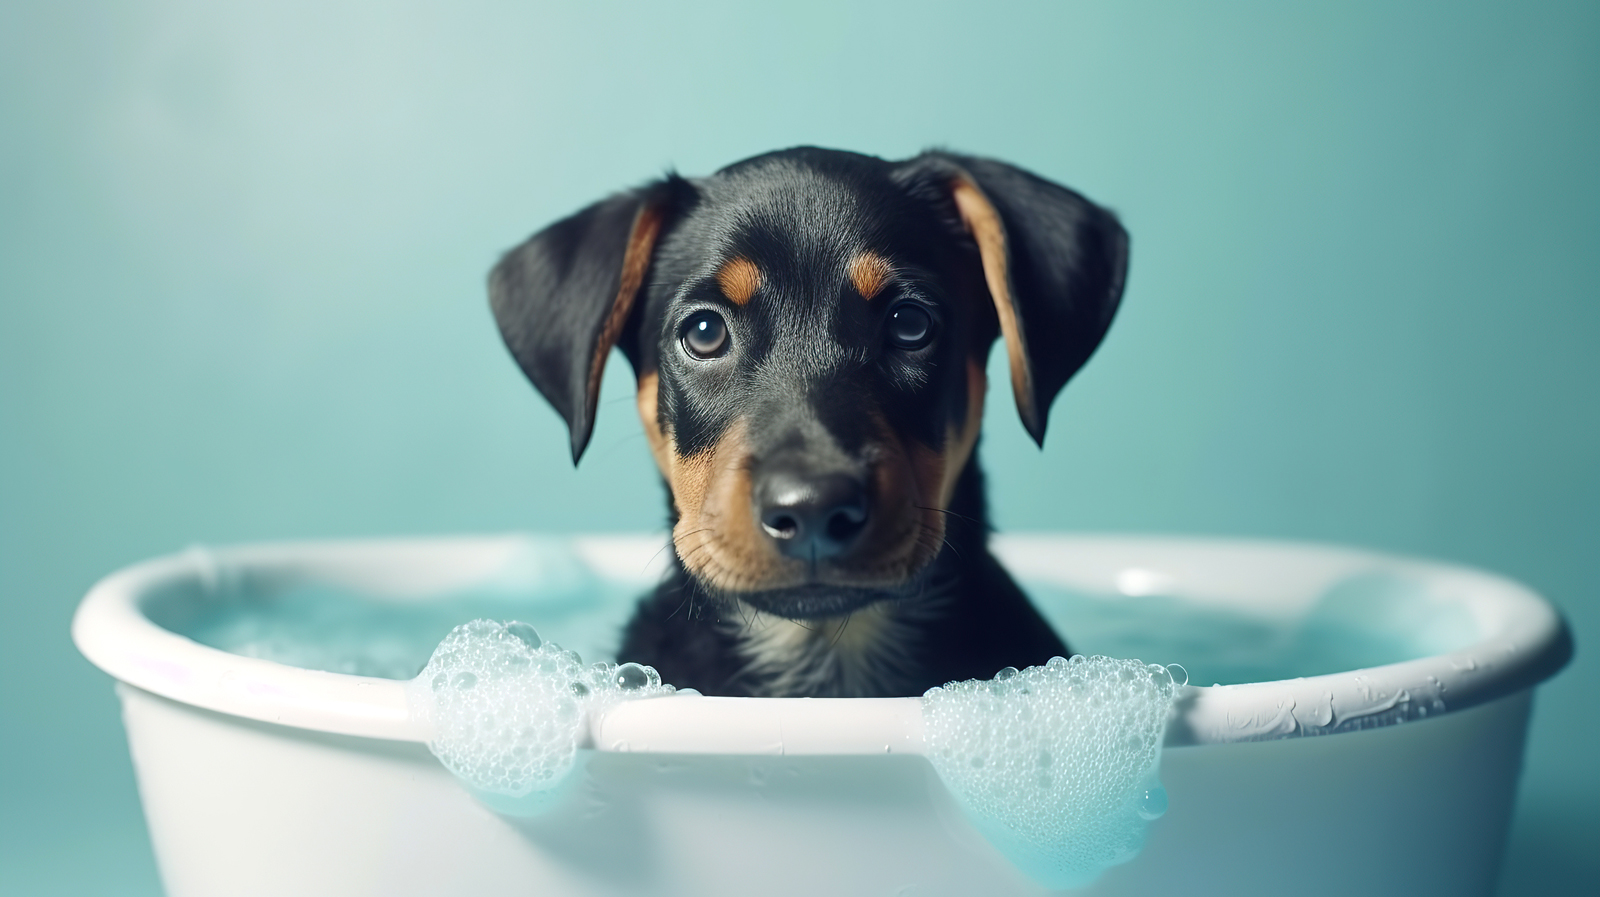 A Dog Taking An Oatmeal Bath, With Bubbles Around It